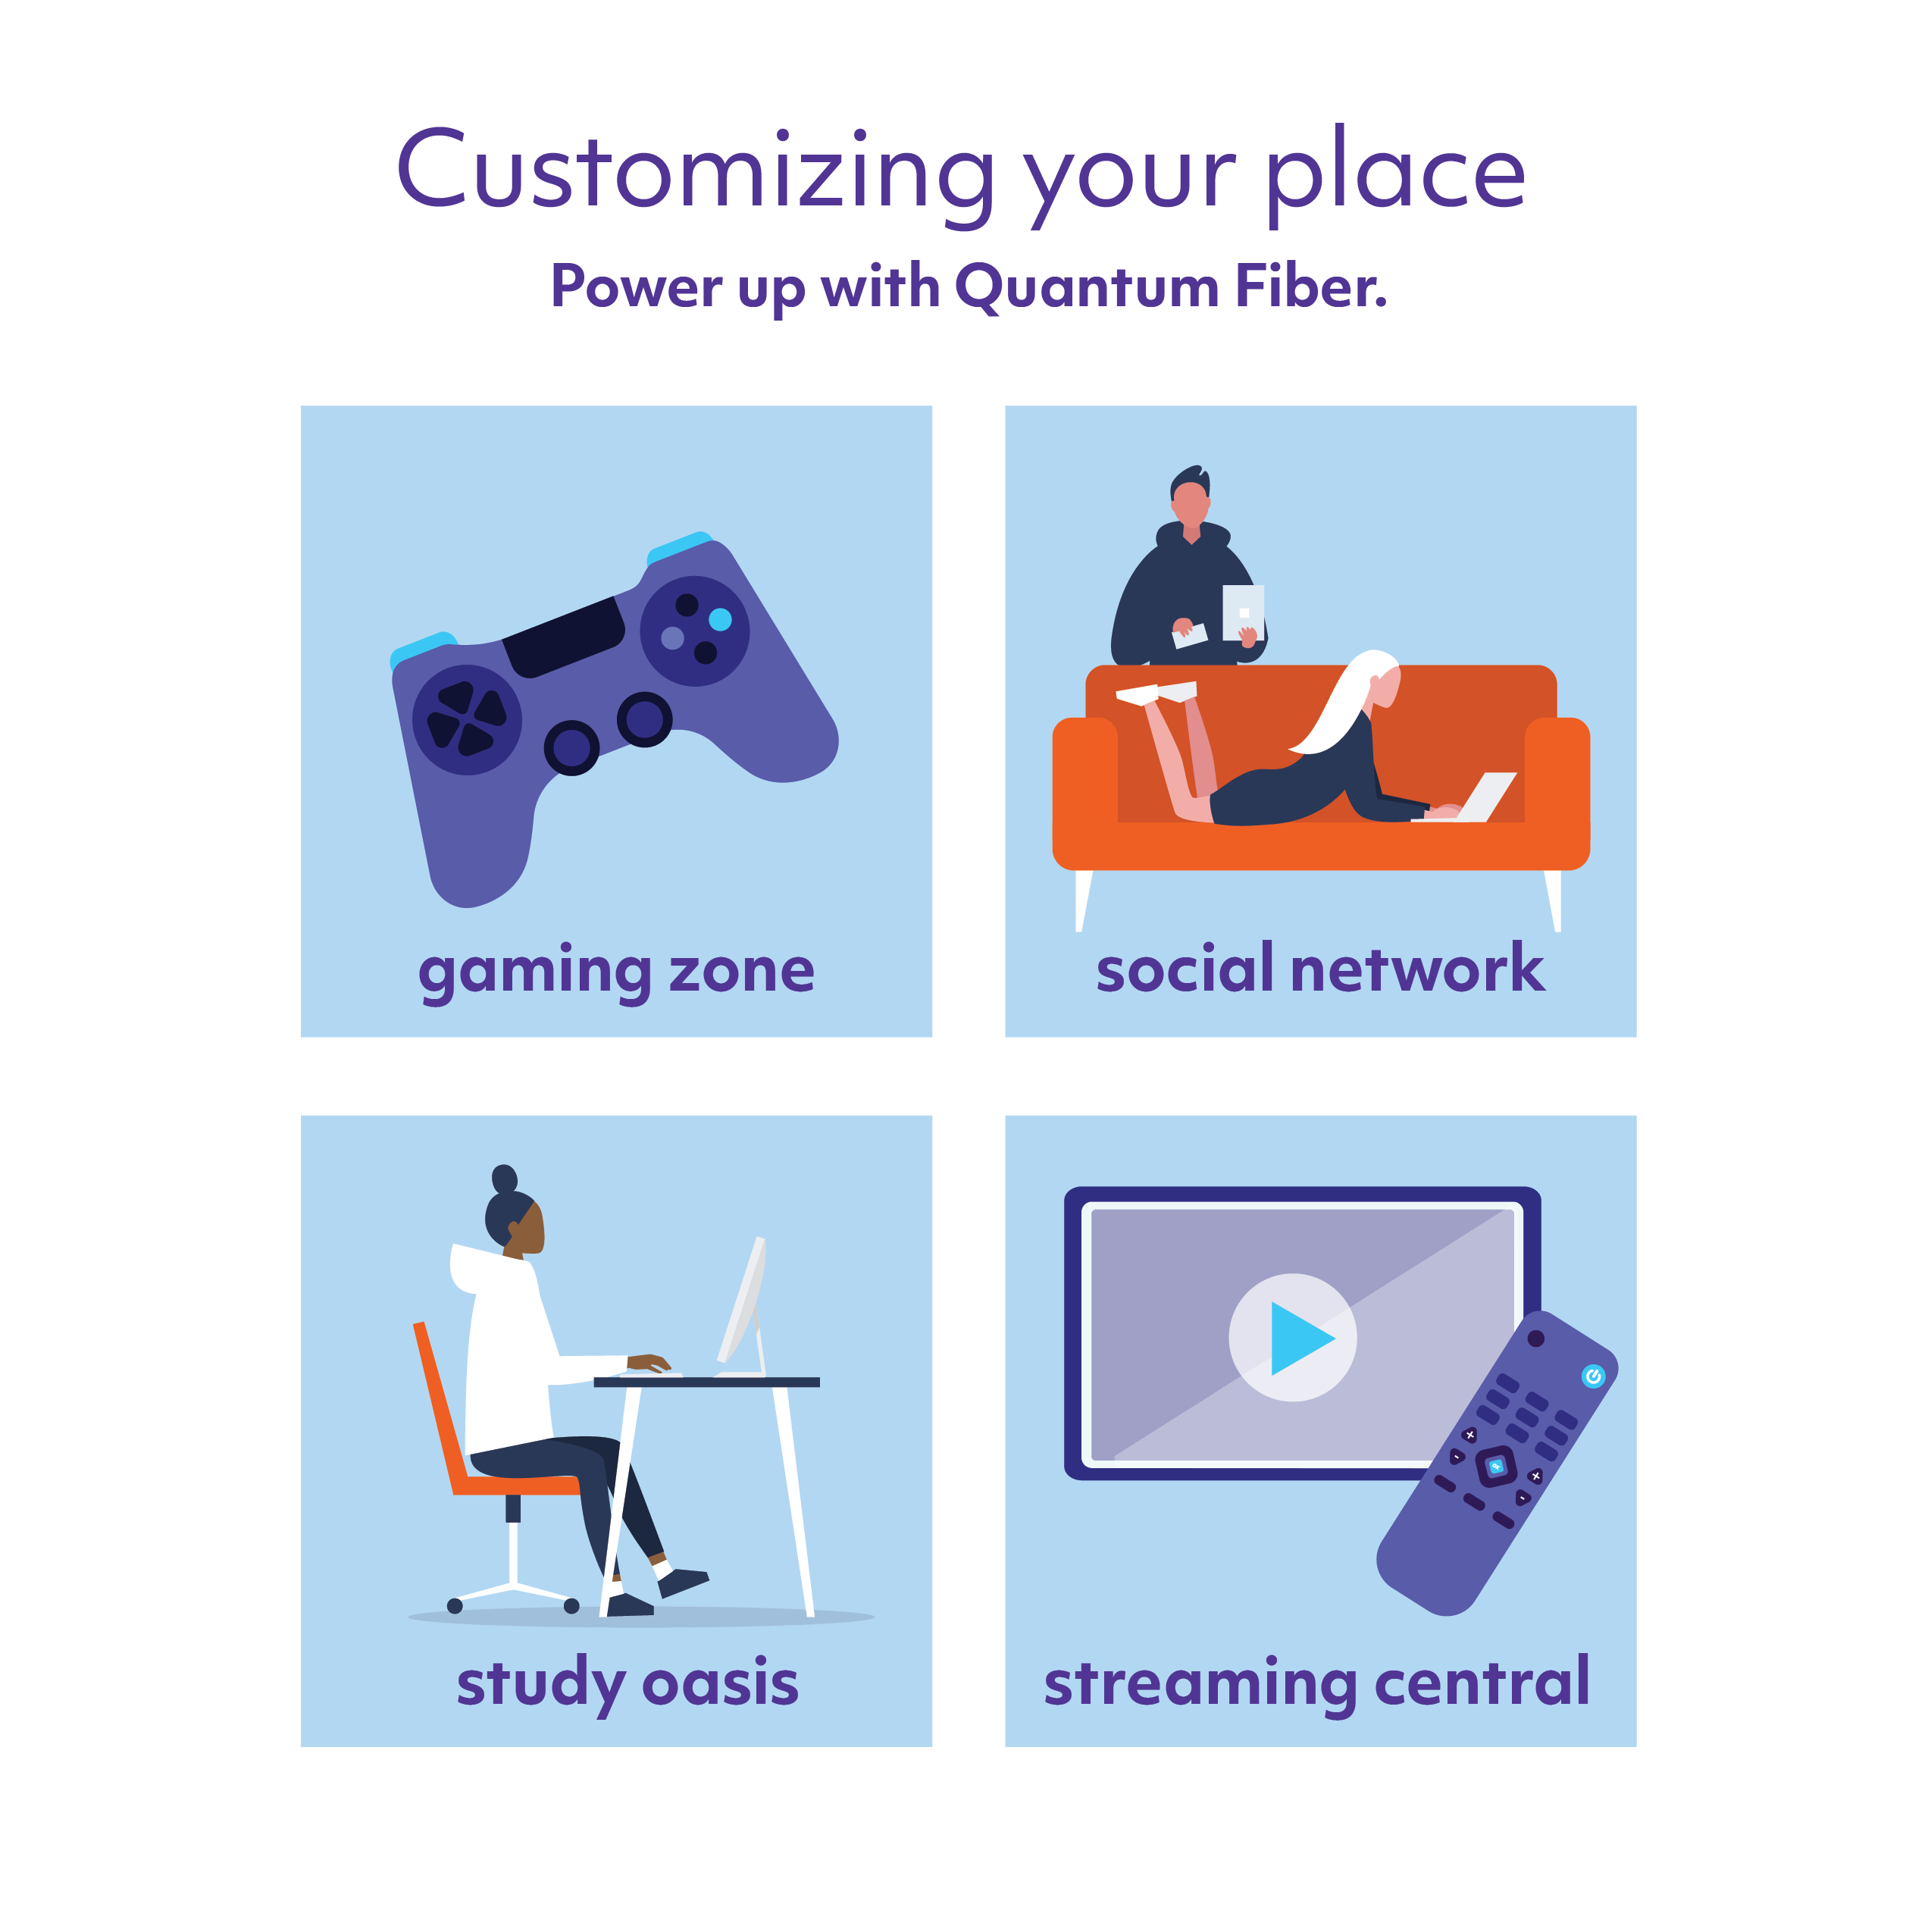 Customizing your place - Power up with Quantum Fiber